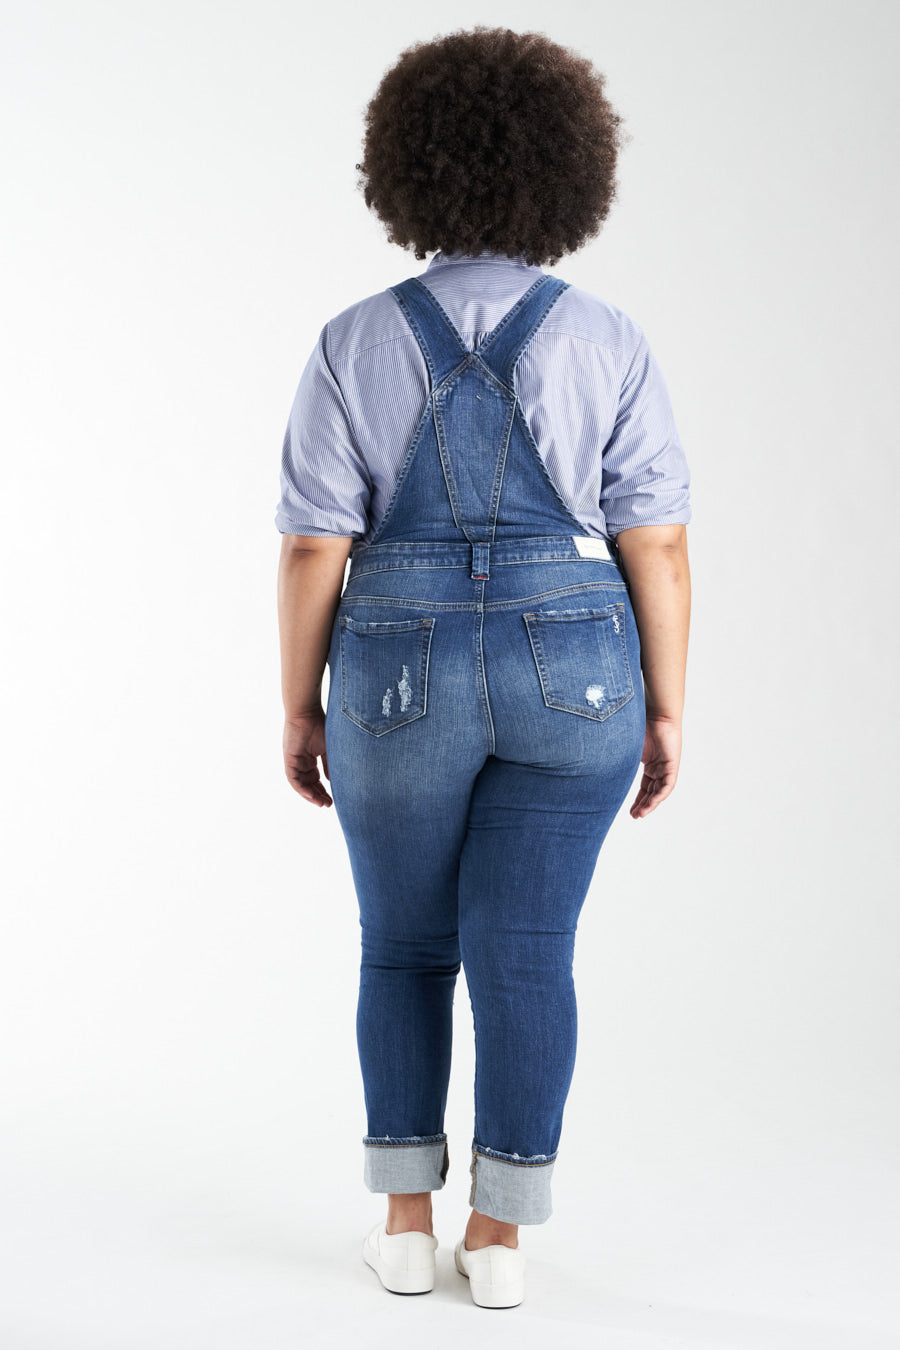 The Overall - Judy - SLINK JEANS